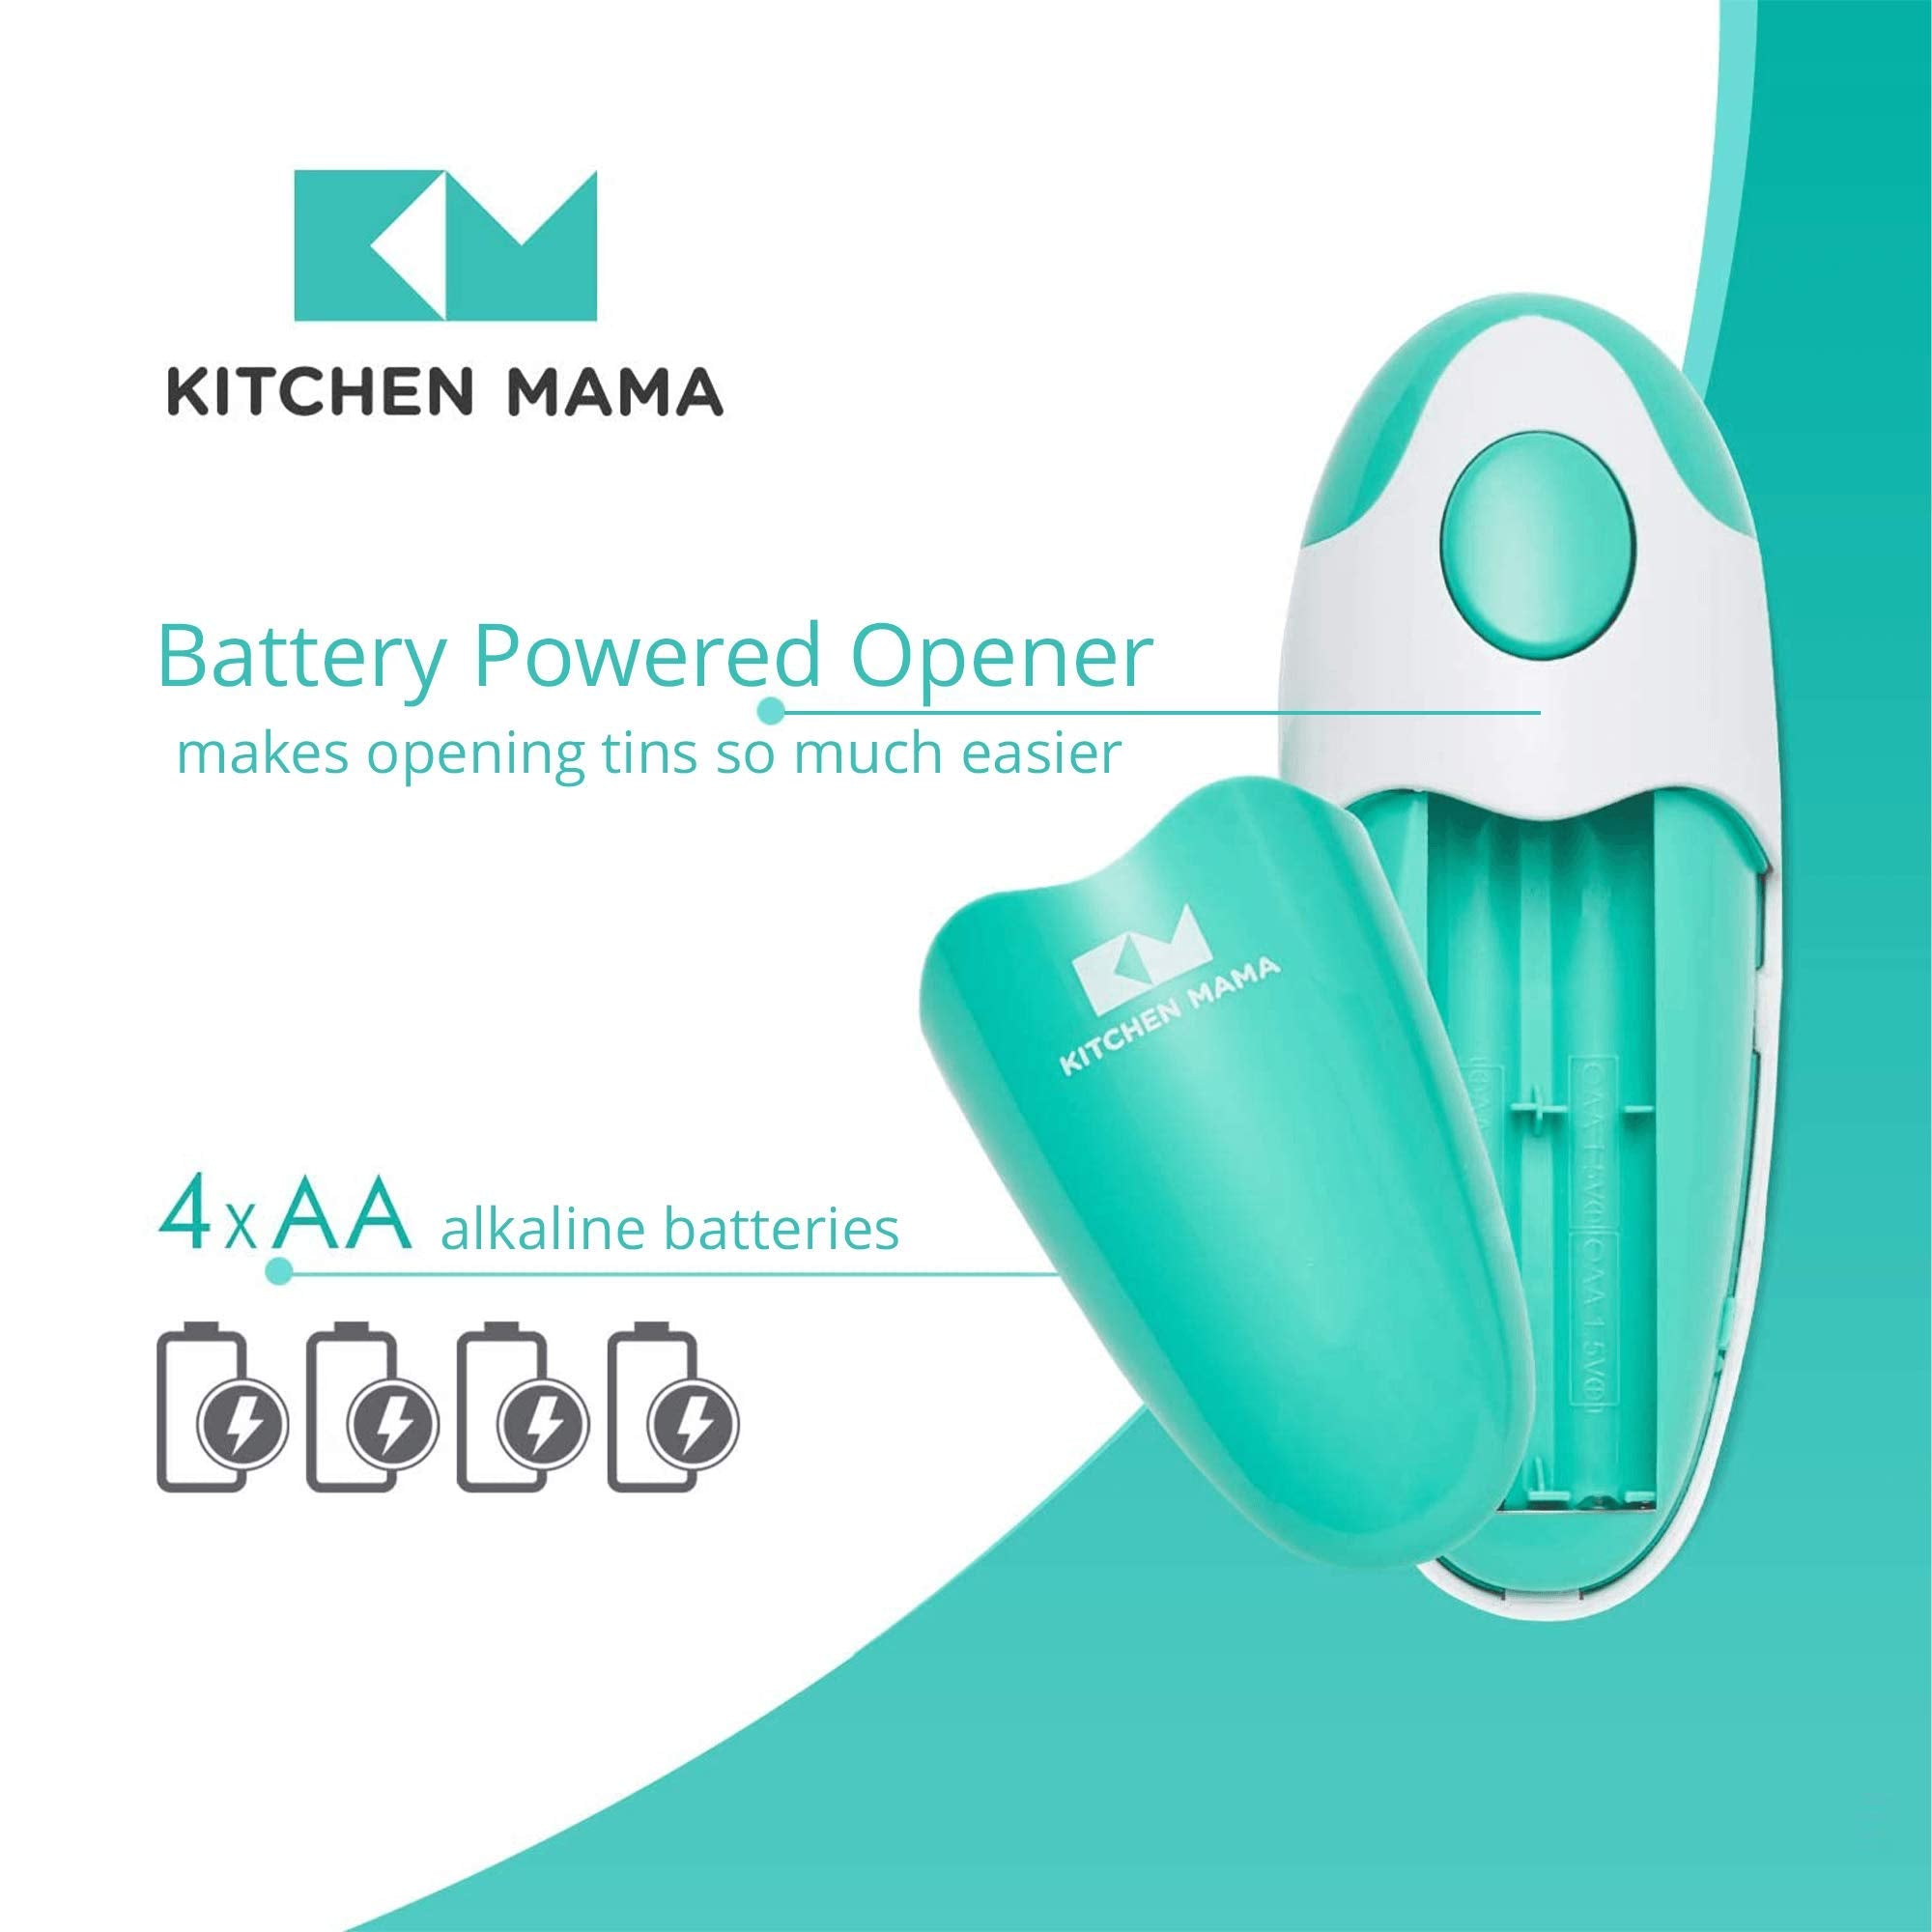 Kitchen Mama Auto Electric Can Opener: Open Your Cans with A Simple Press of Button - Automatic, Hands Free, Smooth Edge, Food-Safe, Battery Operated, YES YOU CAN (Teal)